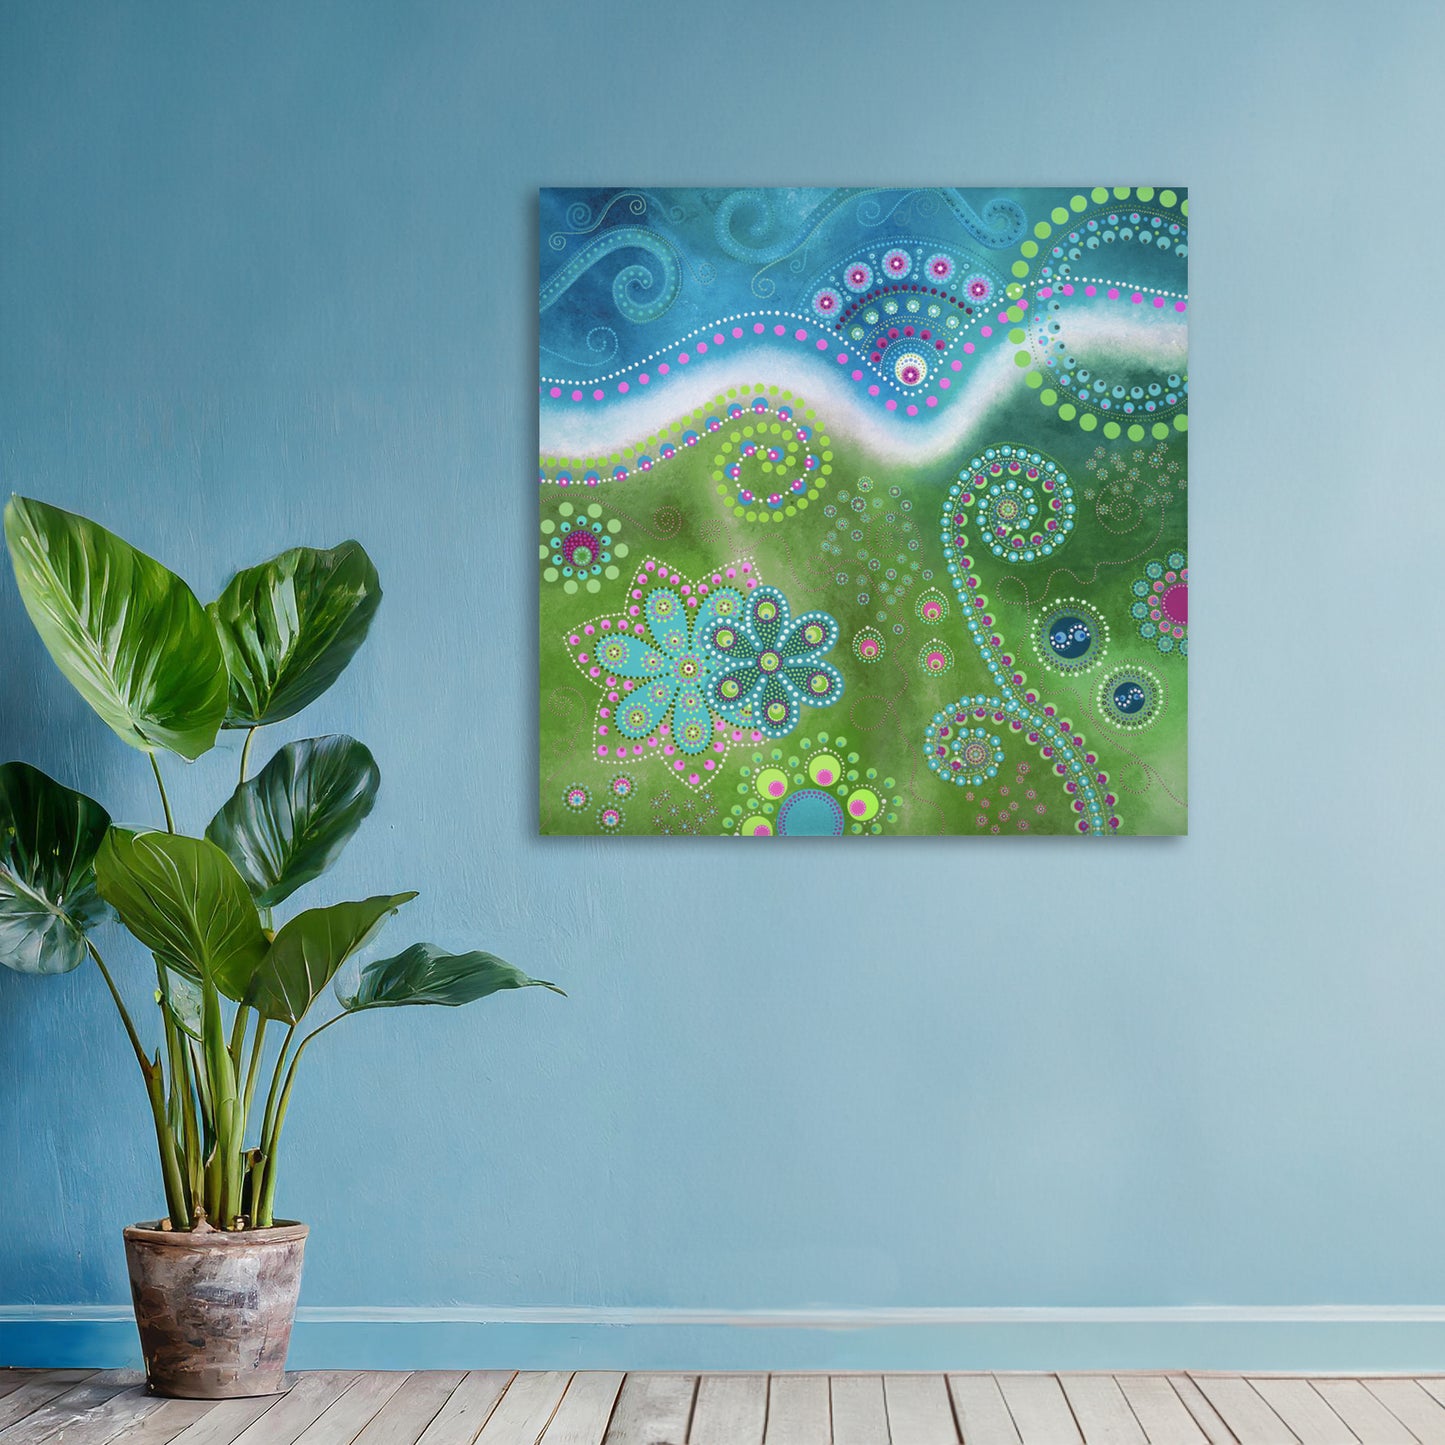 "The Happiness inside" - Green and blue - by Fanny Fay Engström